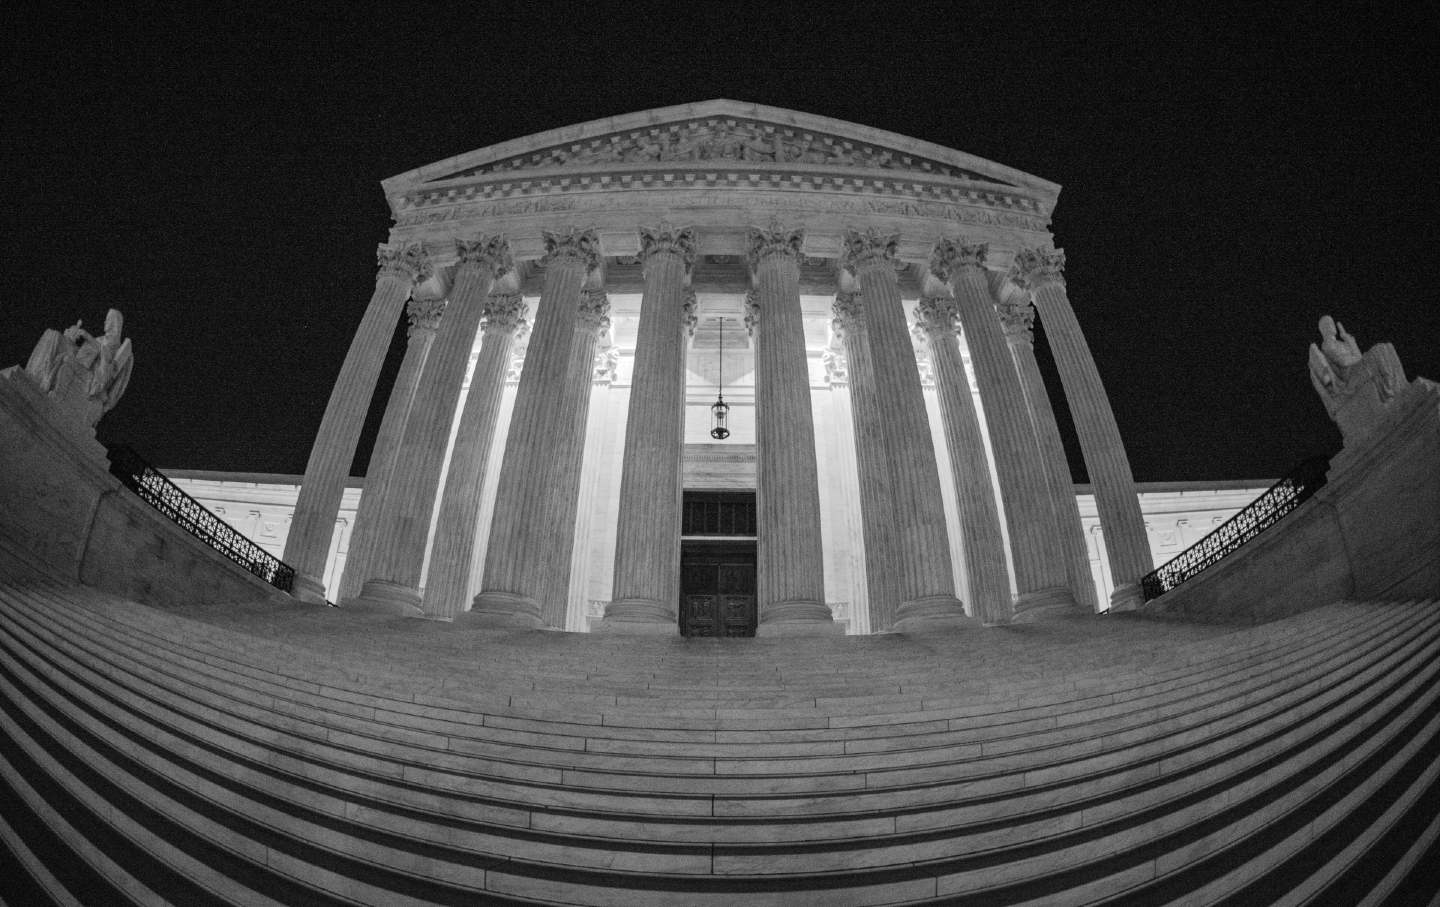 The US Supreme Court Building at night.